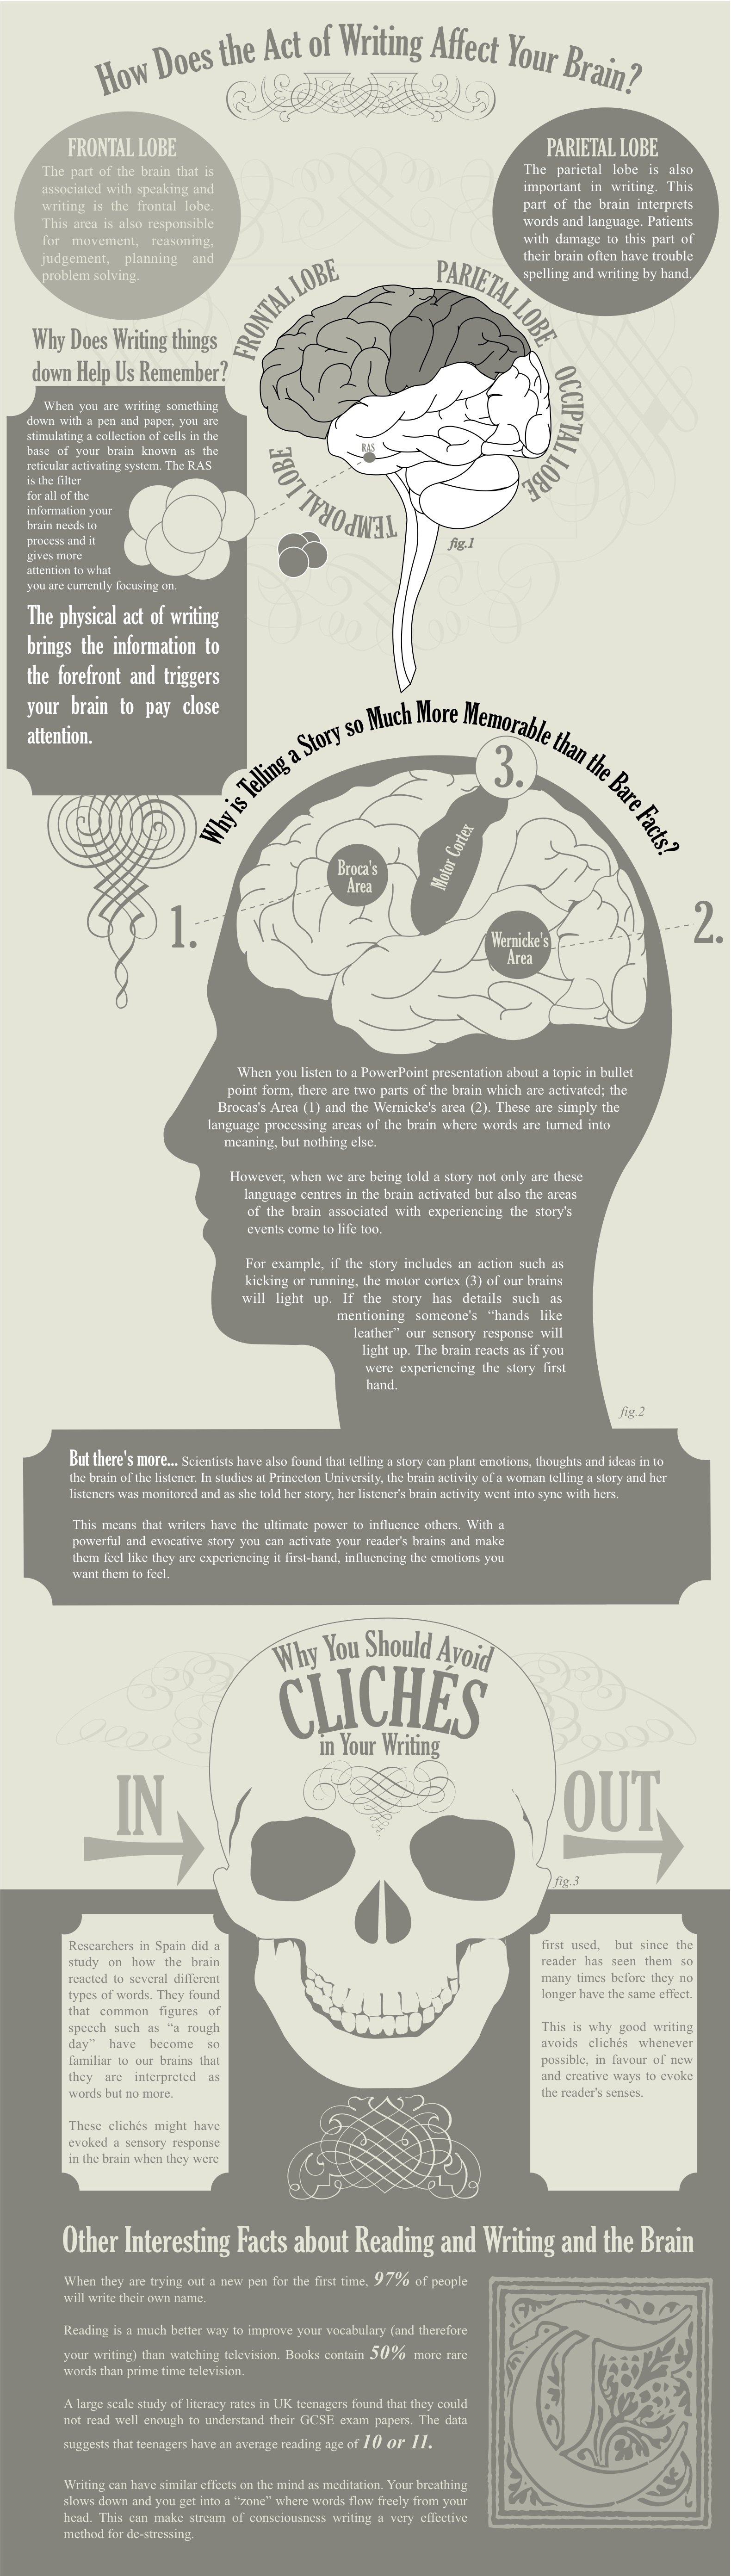 amazing-facts-about-writing-and-the-brain